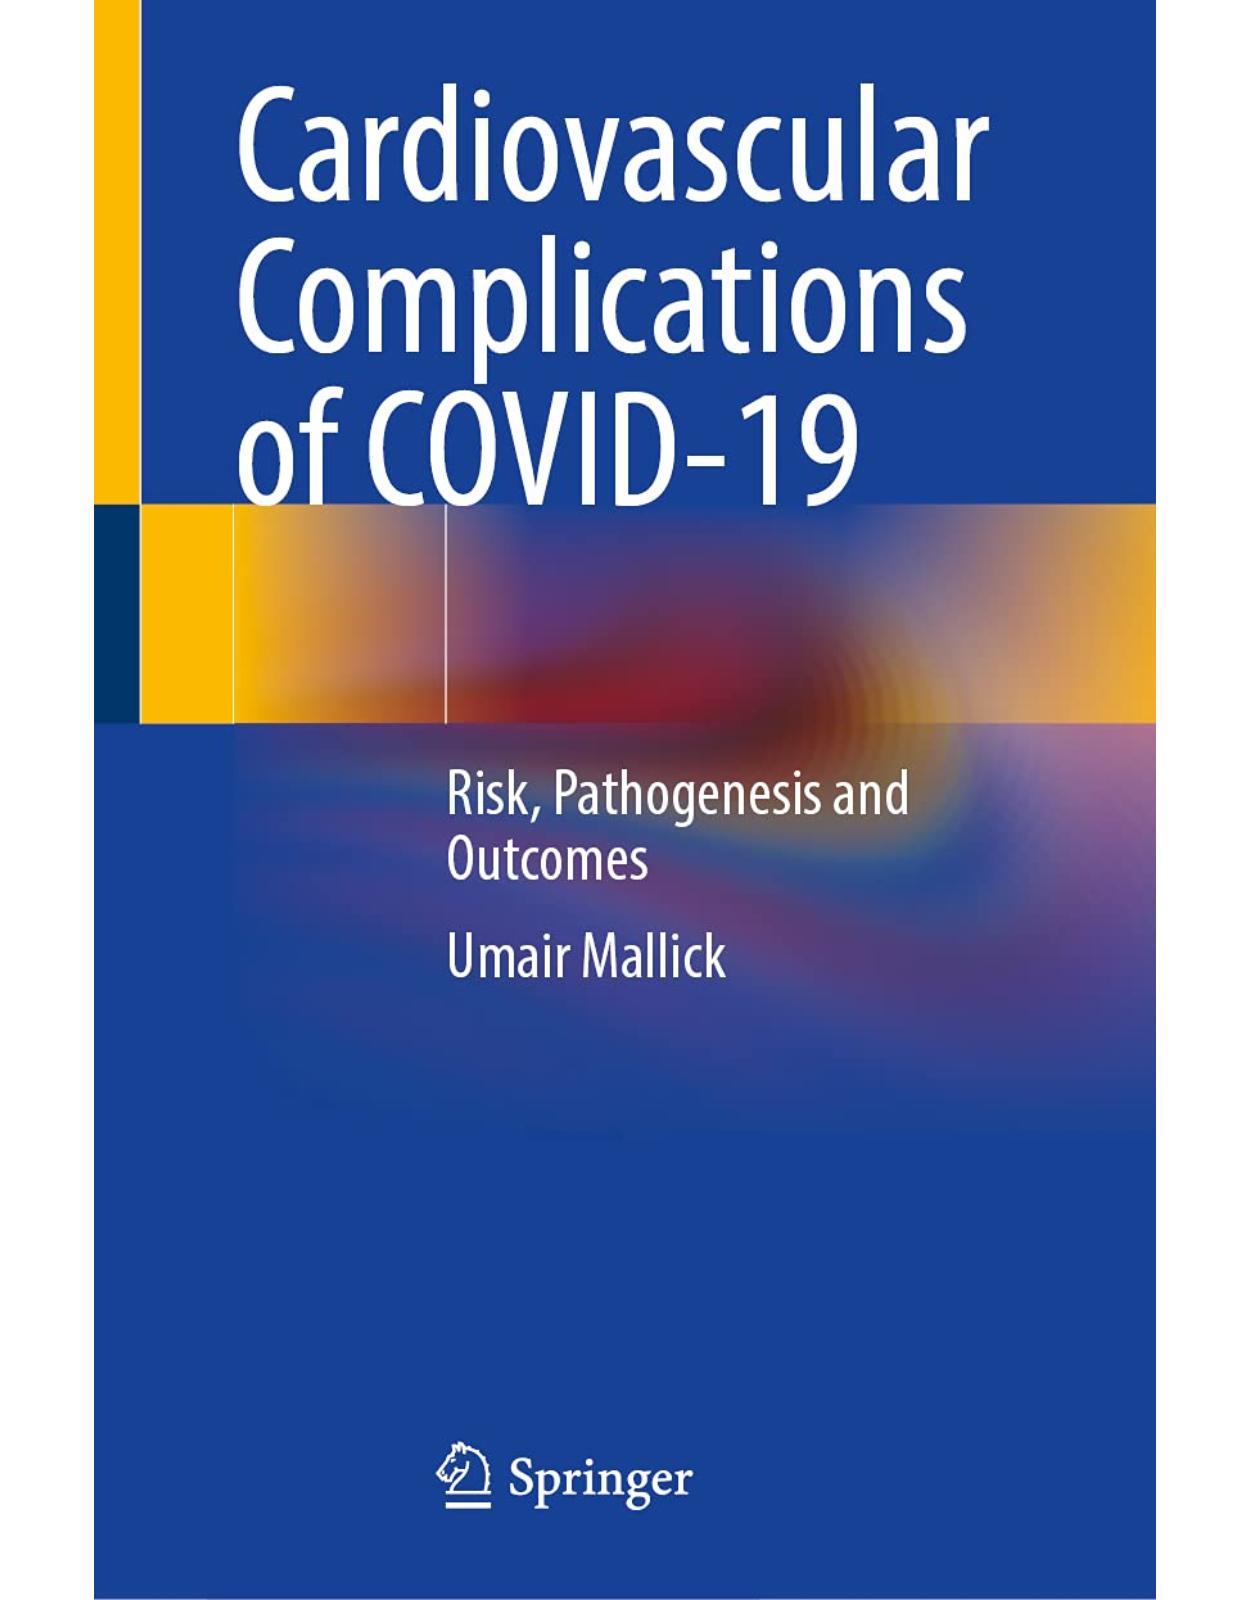 Cardiovascular Complications of COVID-19: Risk, Pathogenesis and Outcomes